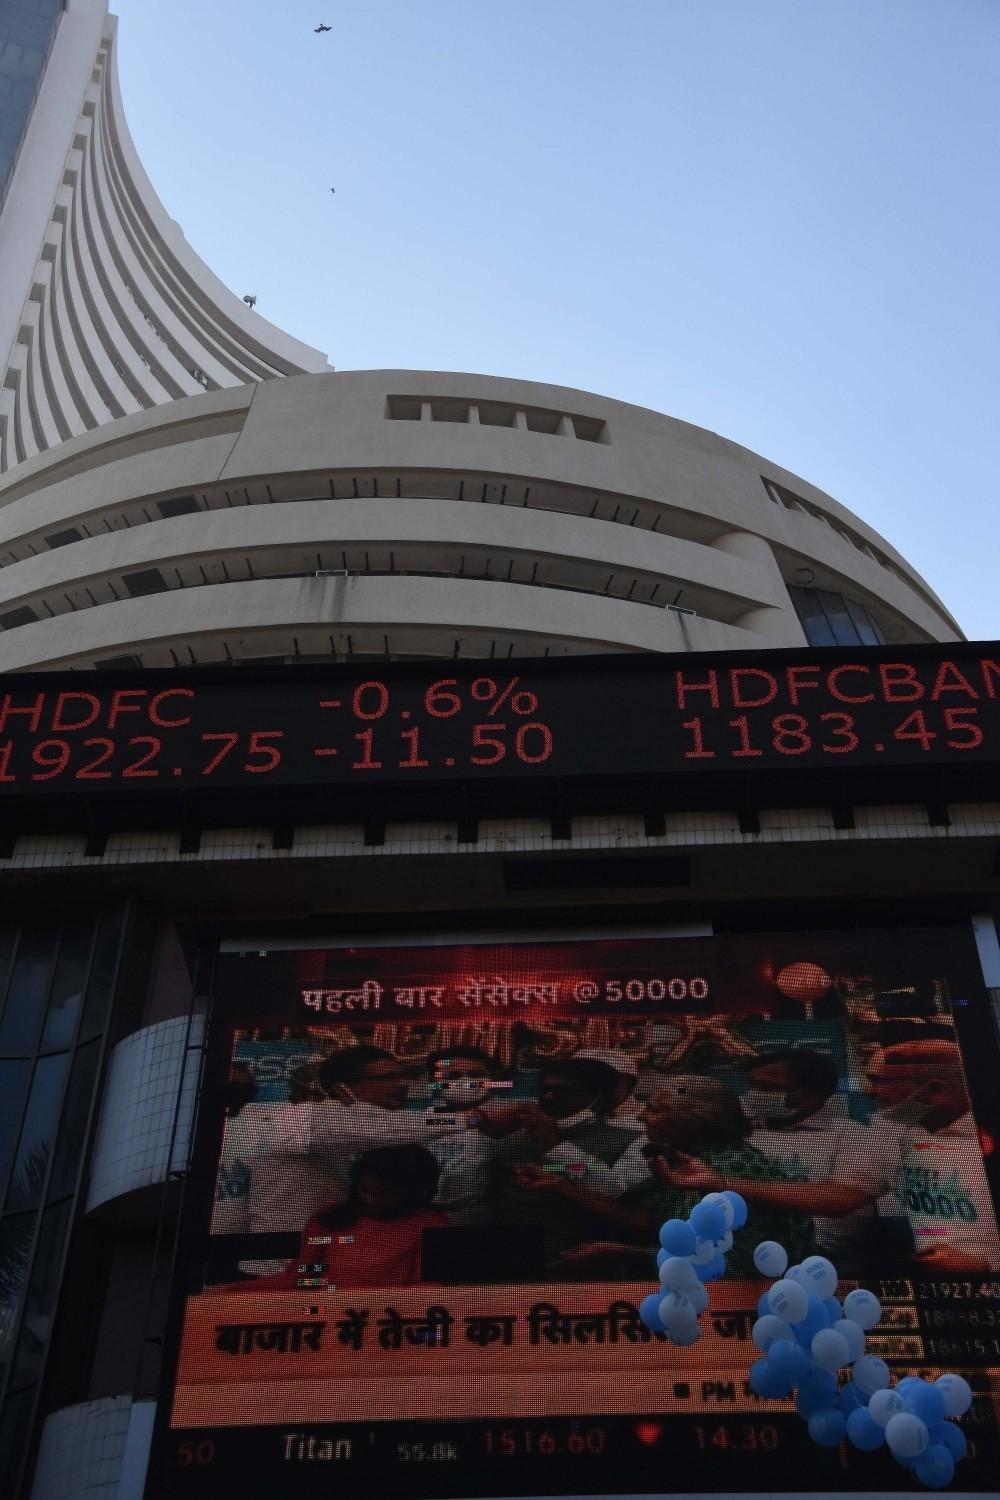 The Weekend Leader - ﻿Sensex ends above 51,000, IT stocks up